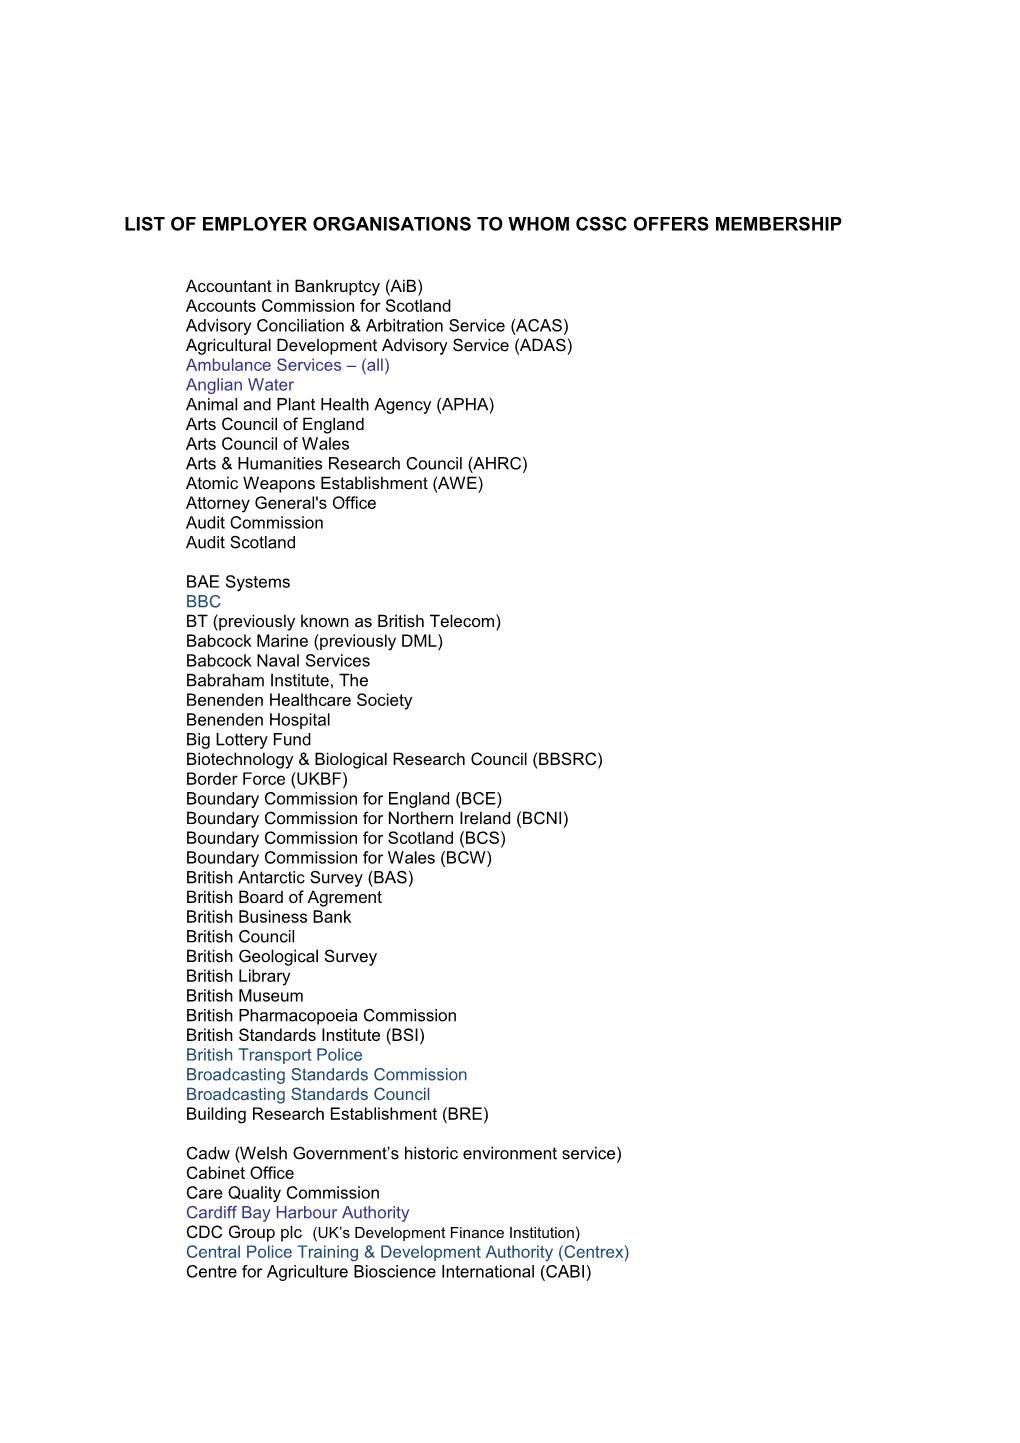 List of Employer Organisations to Whom Cssc Offers Full Membership